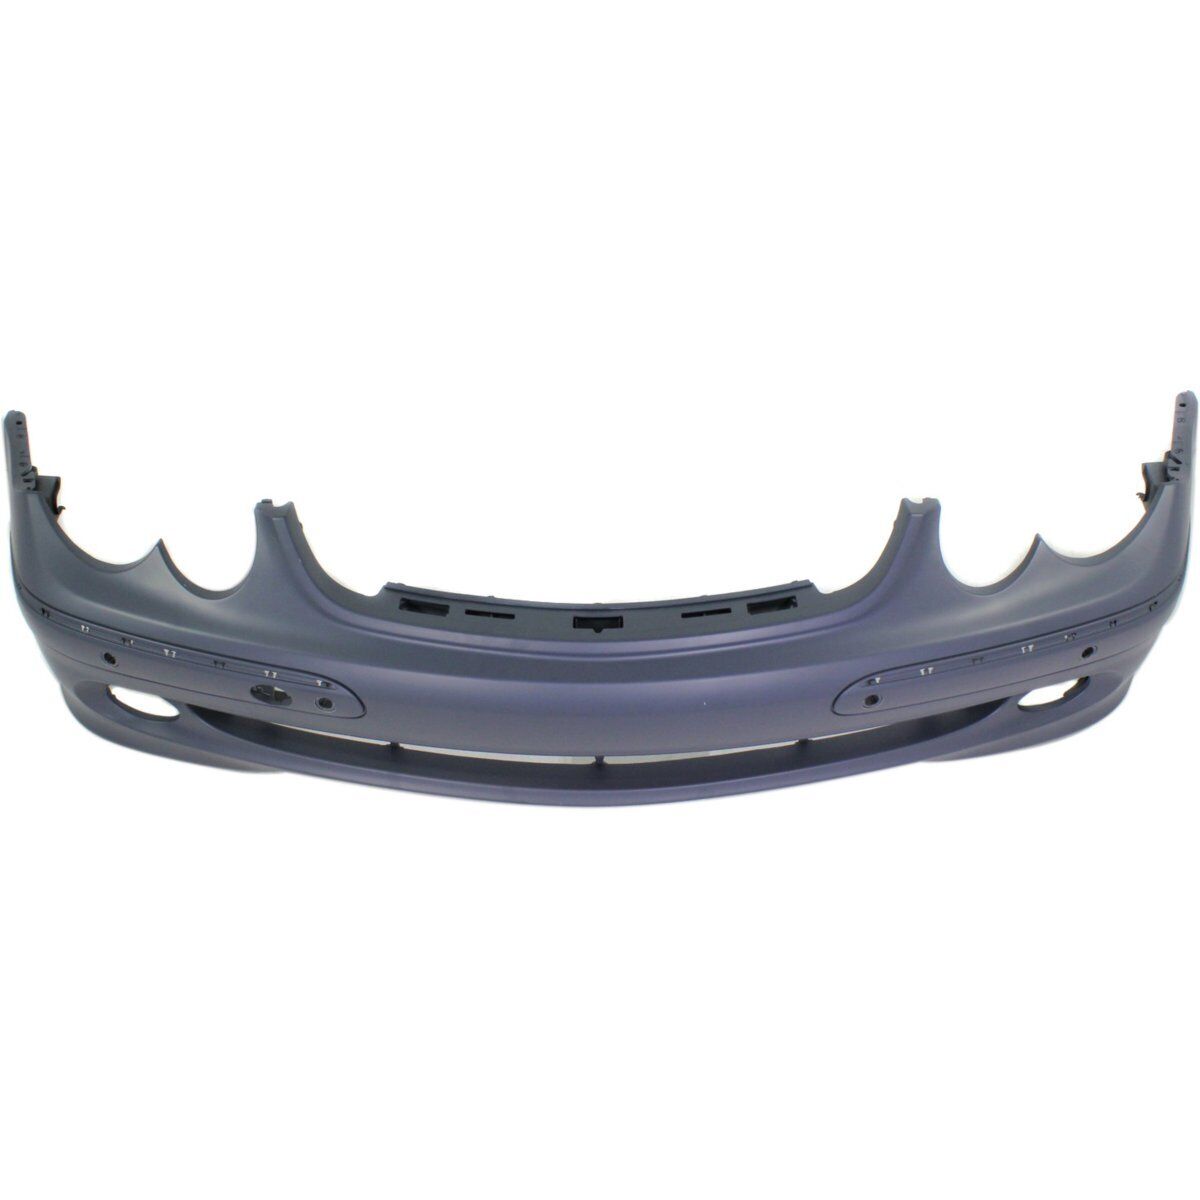 2003-2009 MERCEDES-BENZ CLK-CLASS; Front Bumper Cover; W209 w/o HL Washer w/Parktronic w/o Sport Painted to Match